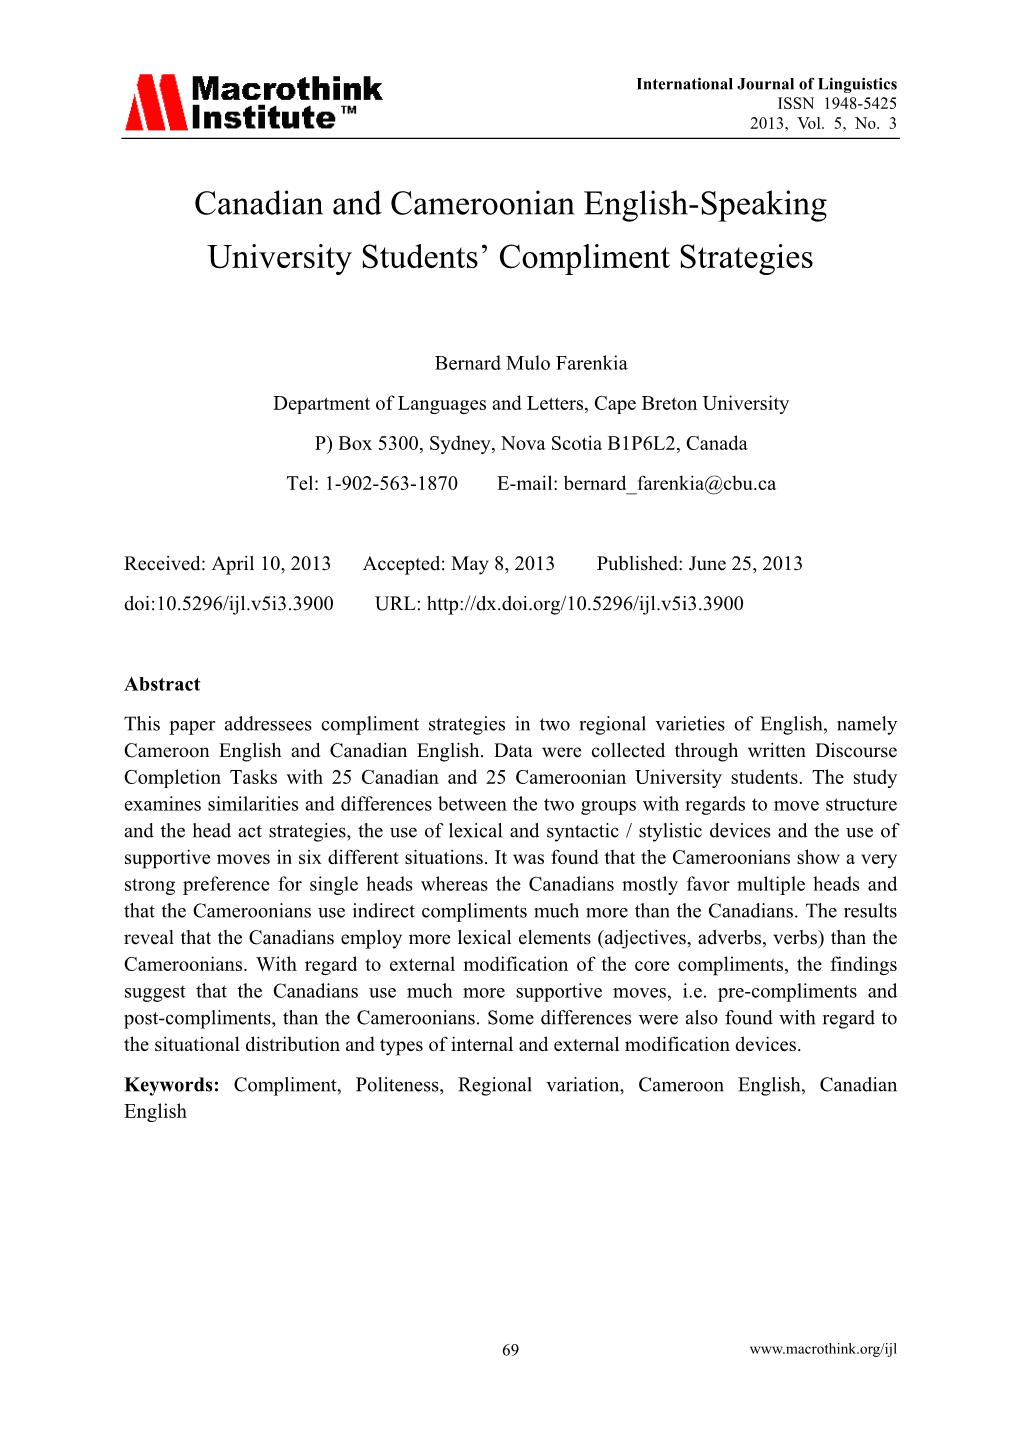 Canadian and Cameroonian English-Speaking University Students’ Compliment Strategies